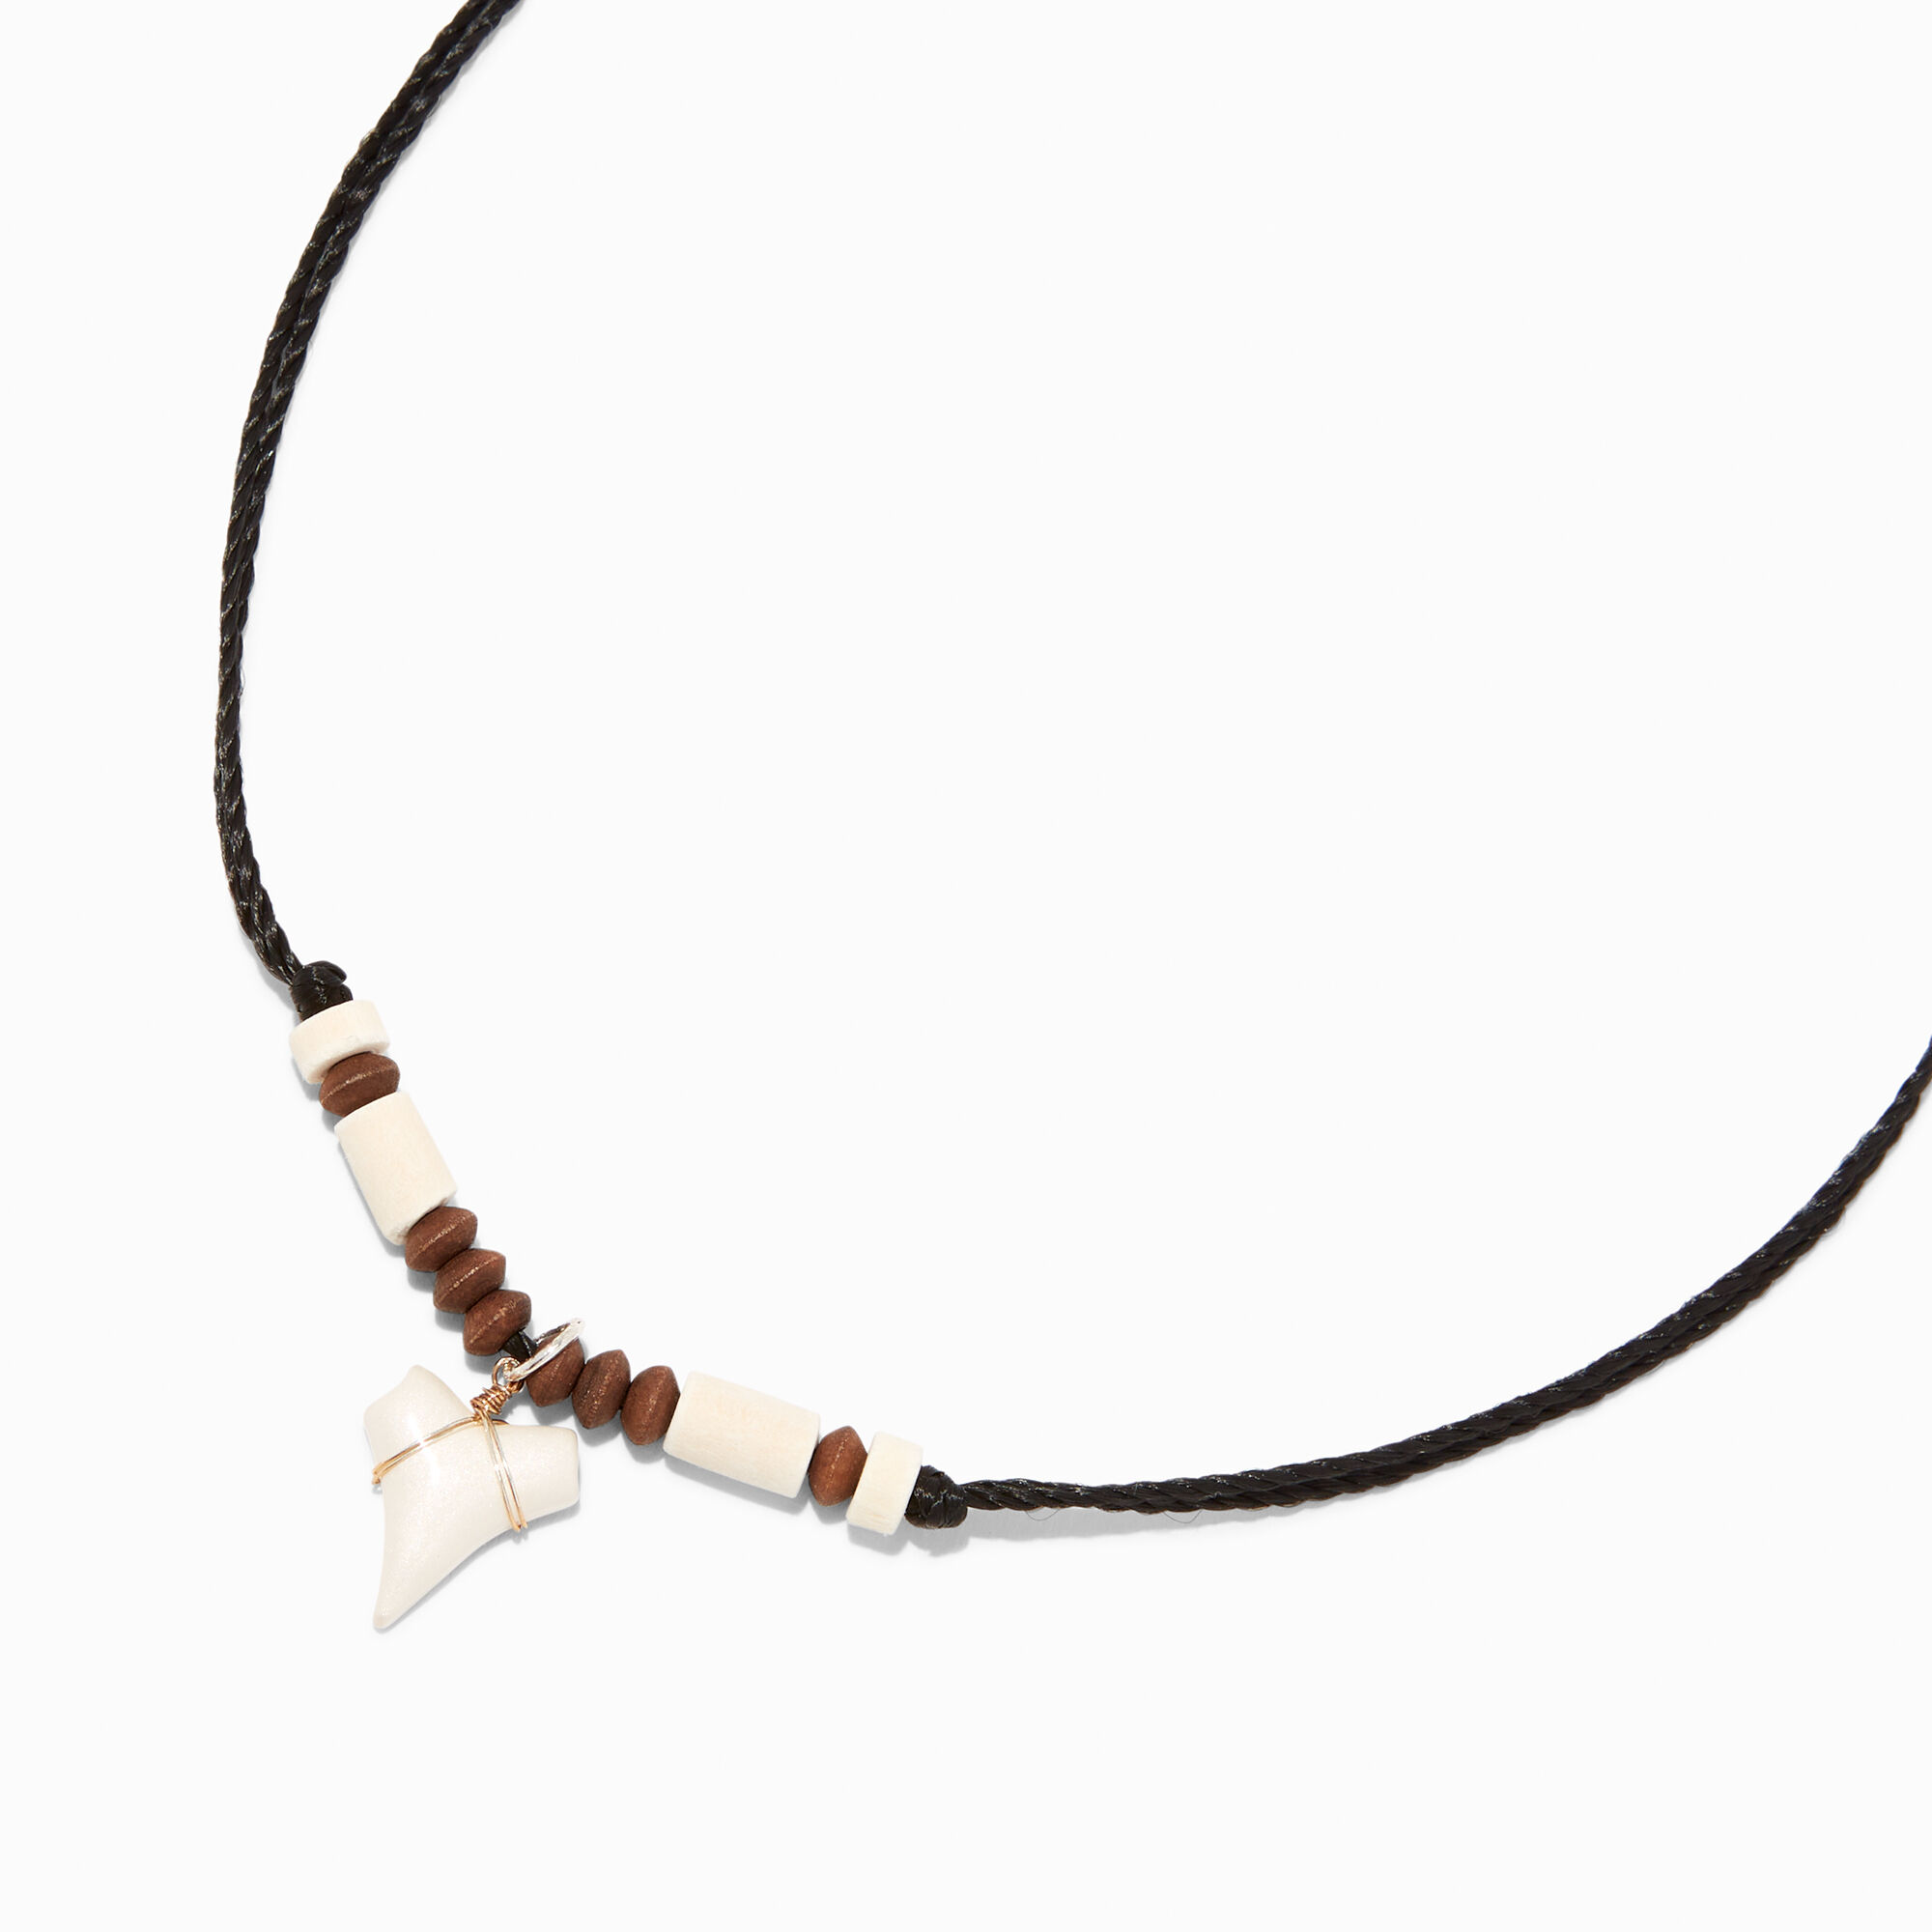 Shark Tooth Necklace with Wood Beads · L1: .75 L2: · MegaTeeth